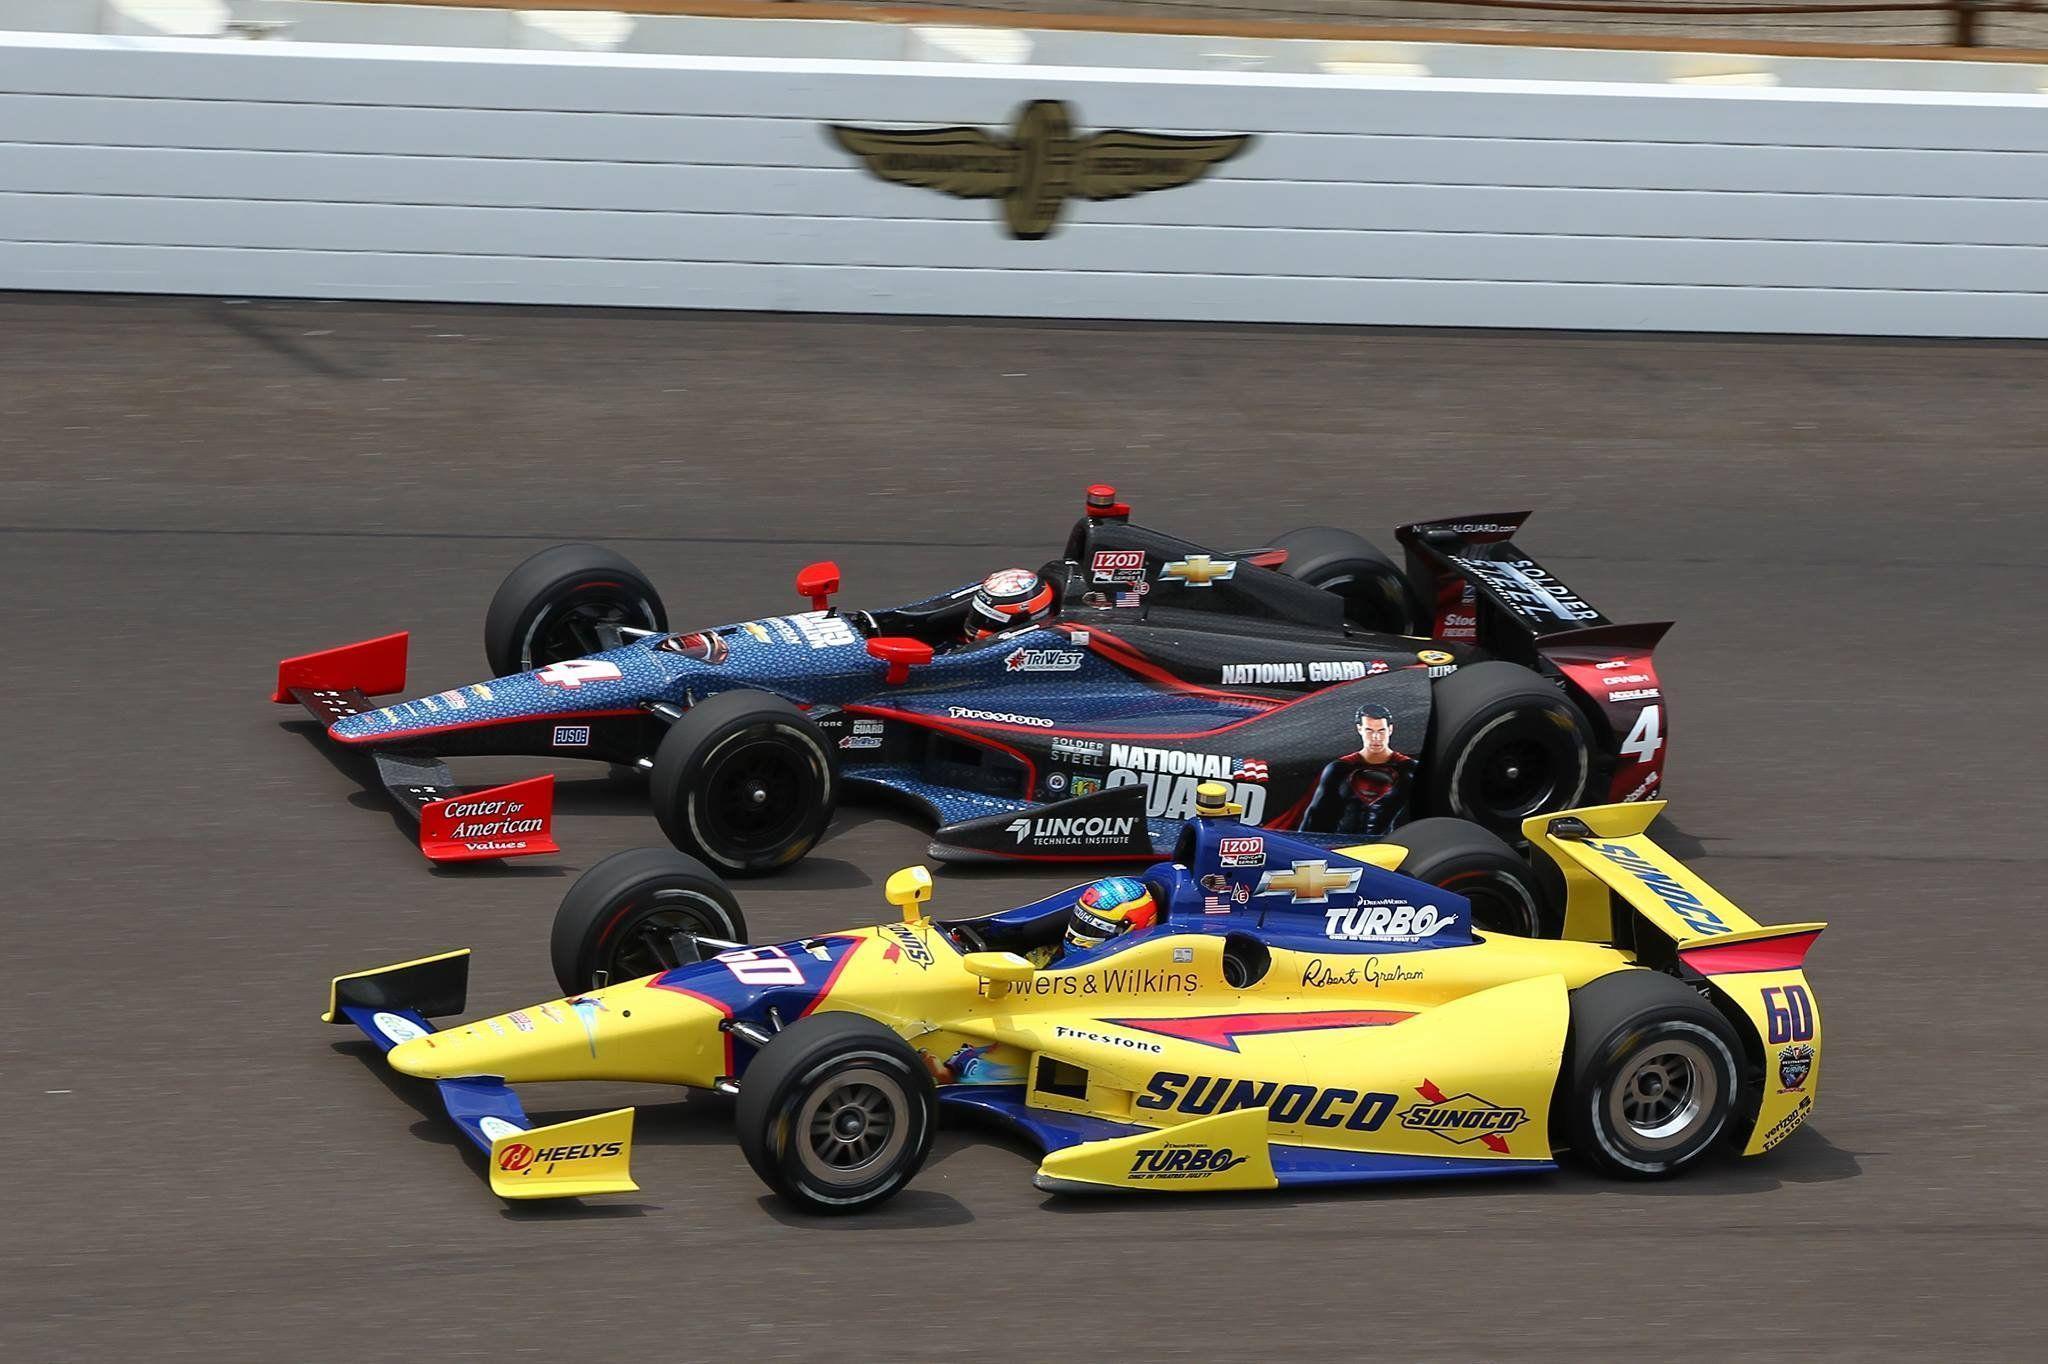 INDY race racing indycar indianapolis 500 d wallpapers.